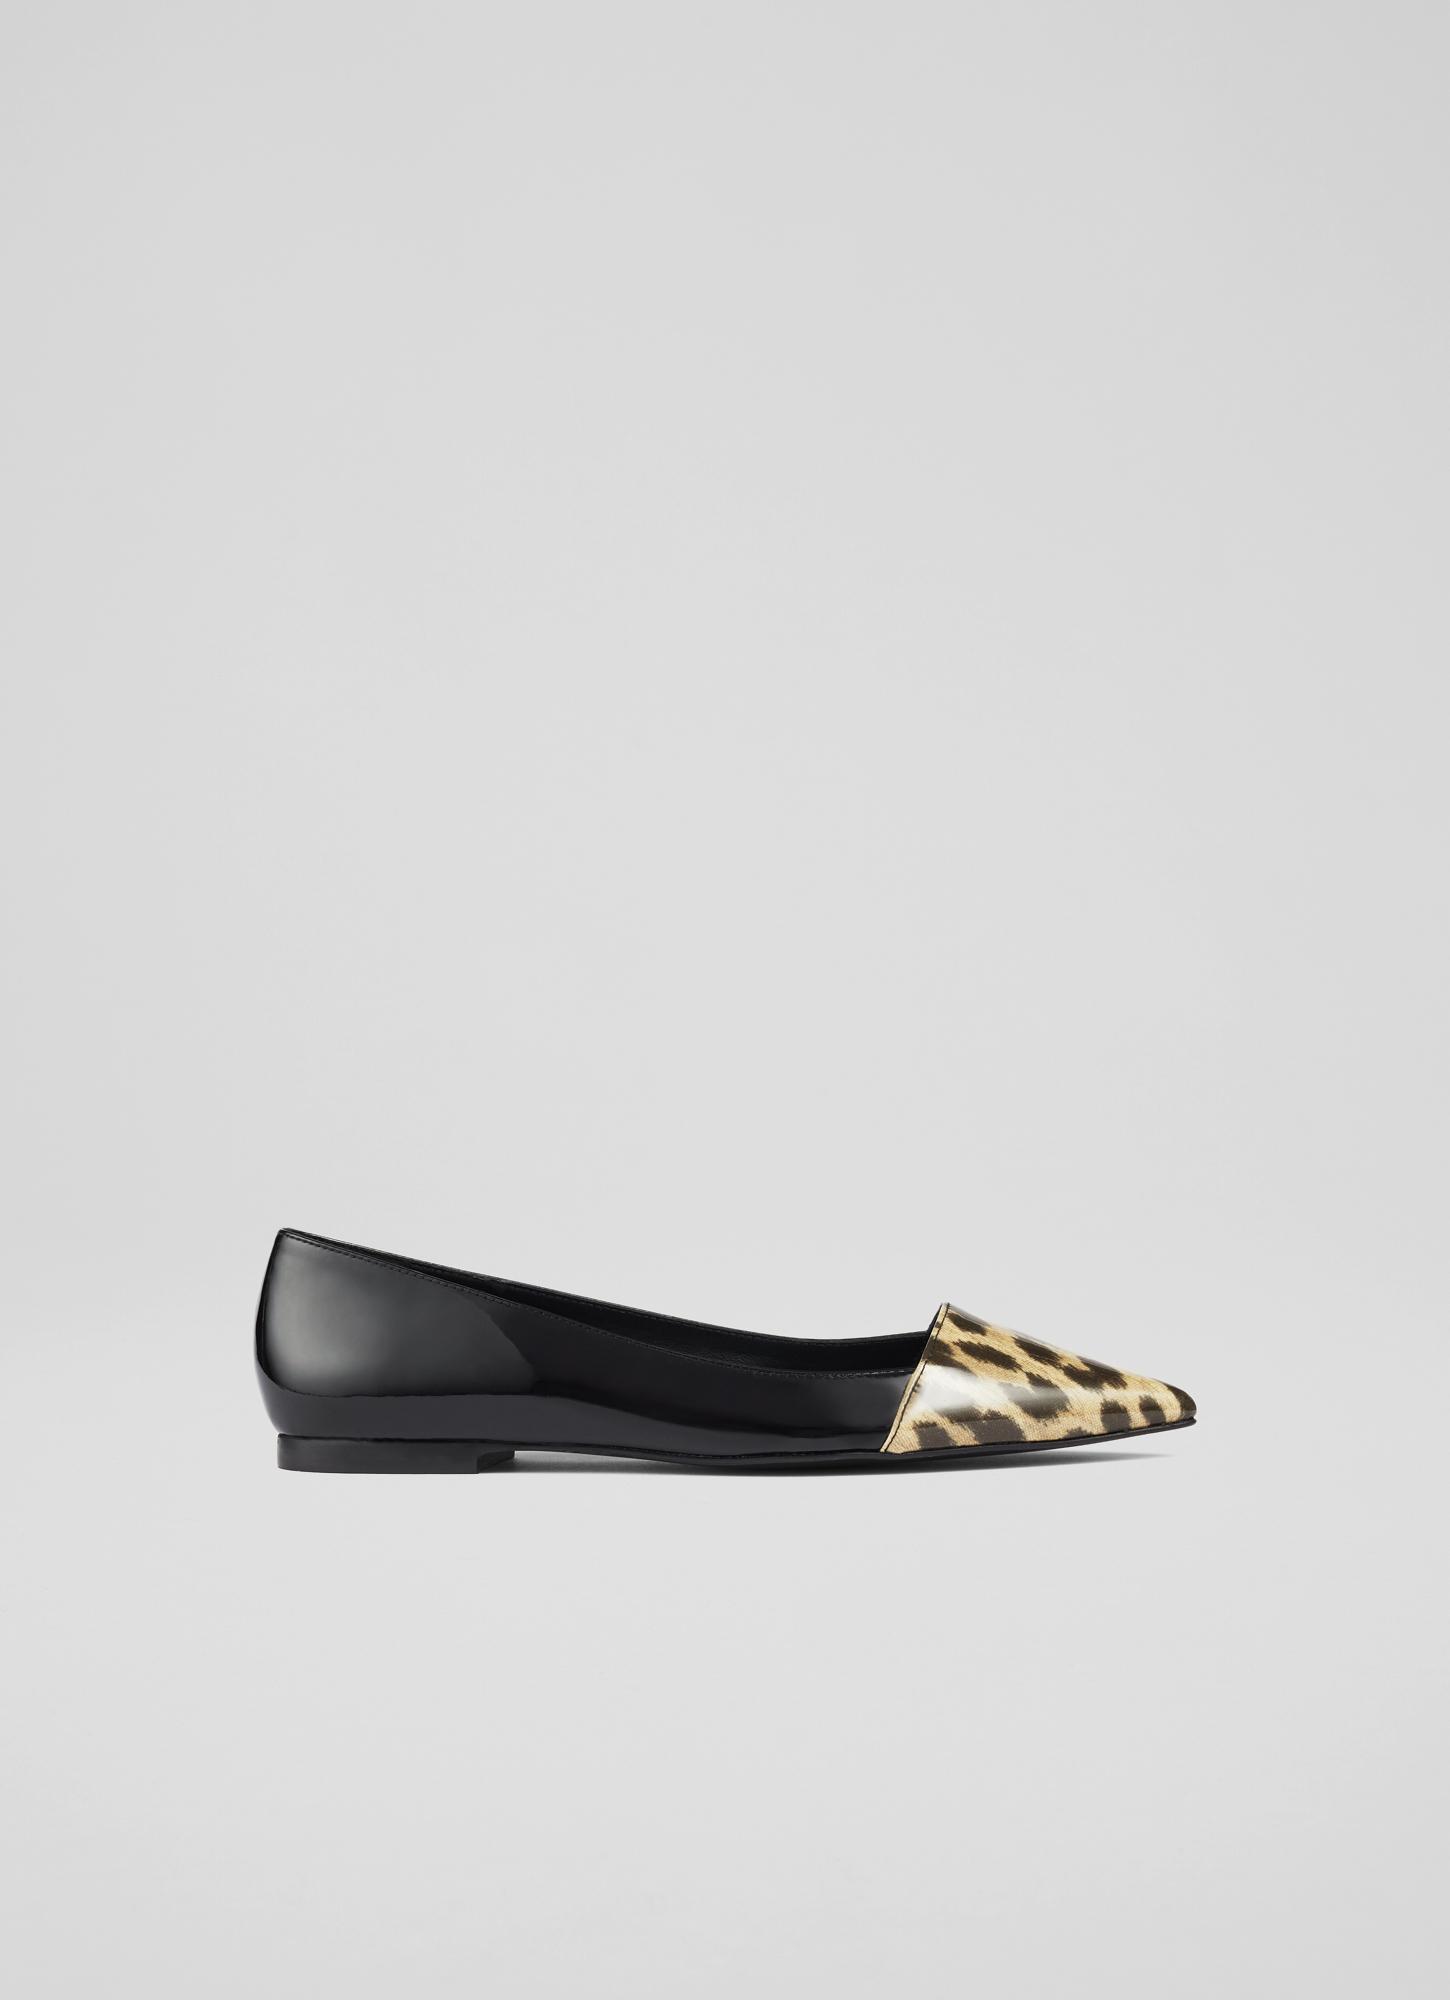 Murphy Leopard Vinyl and Black Patent Pointed Flats, Leopard